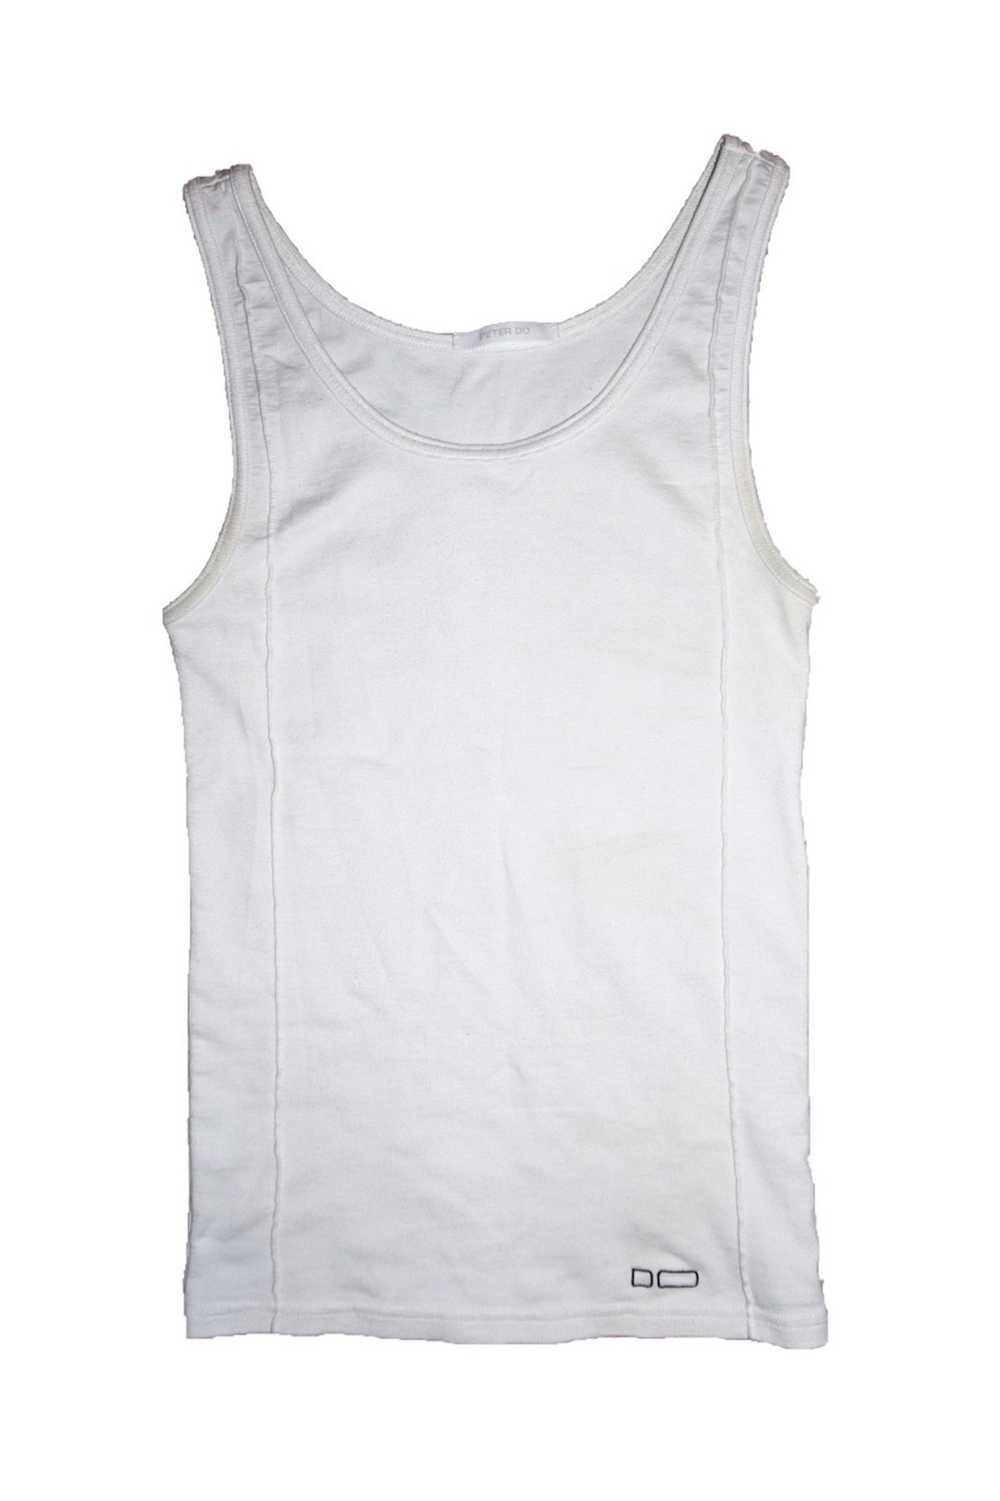 Peter Do Peter do creased tank top - image 3